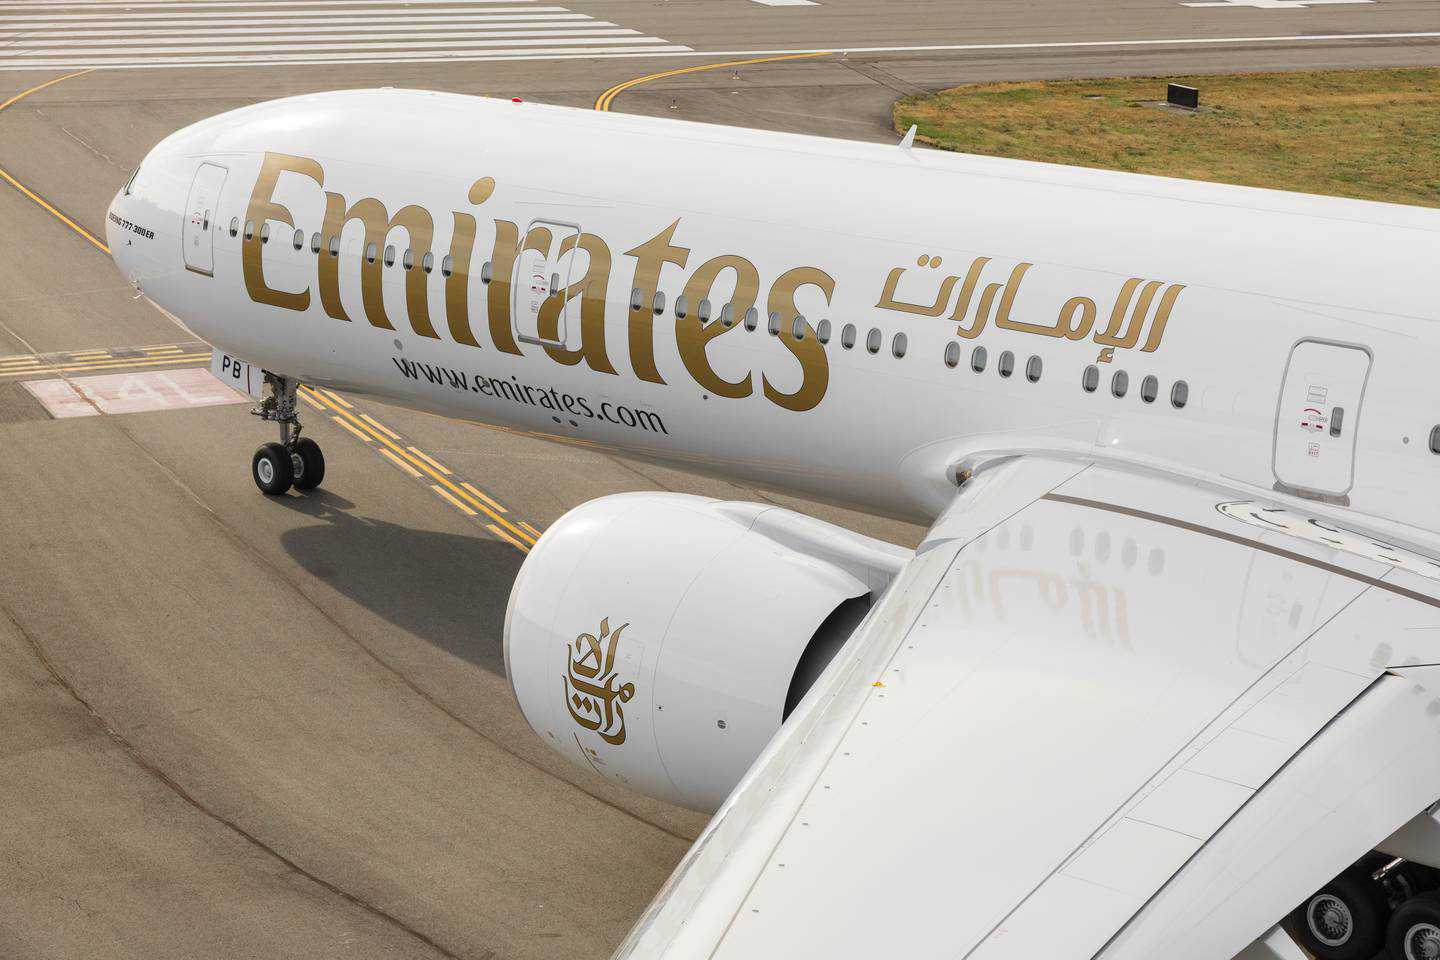 Emirates Airline to end free Covid-19 medical cover on new flight bookings from December